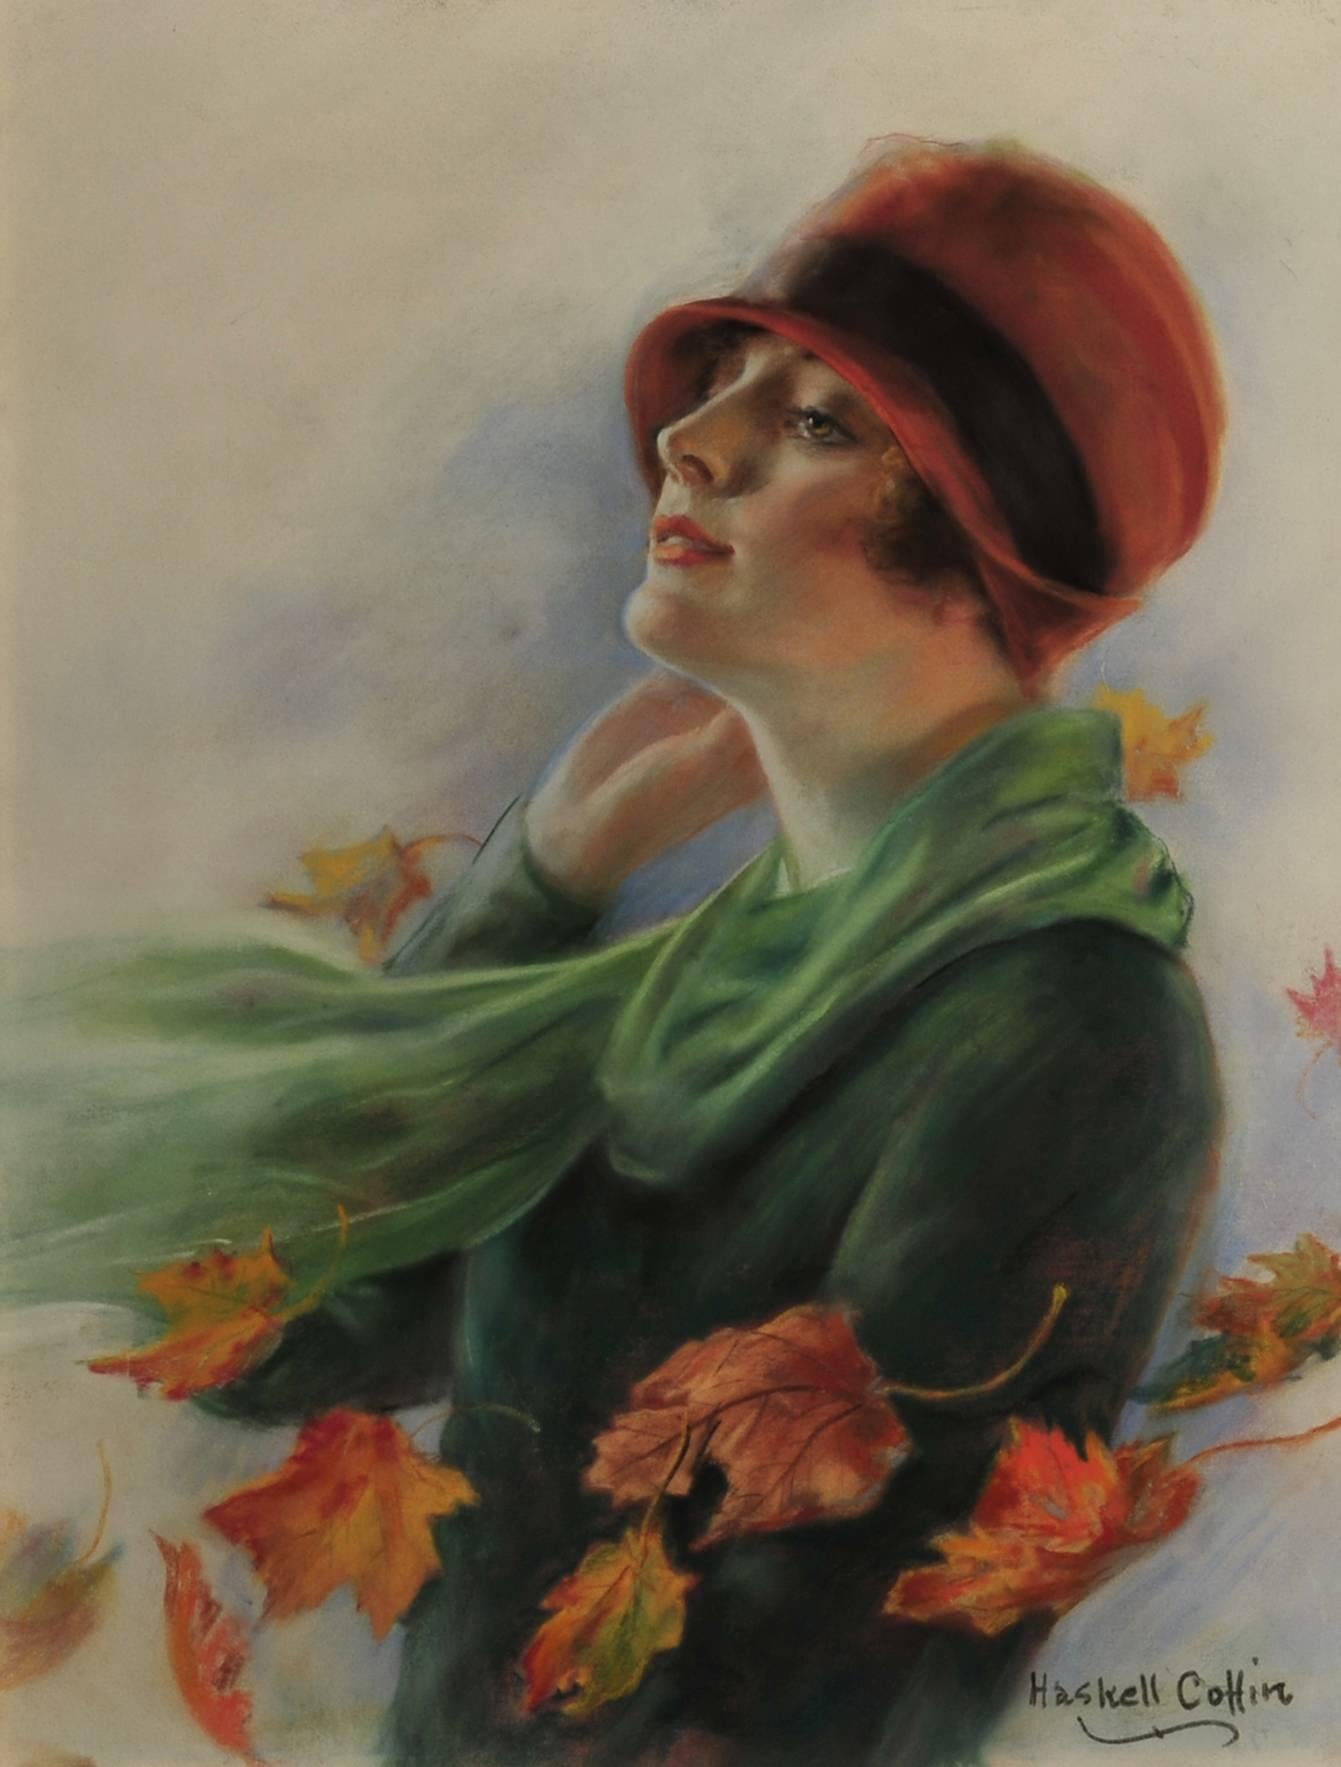 William Haskell Coffin Portrait Painting - Saturday Evening Post Cover, November 5, 1927